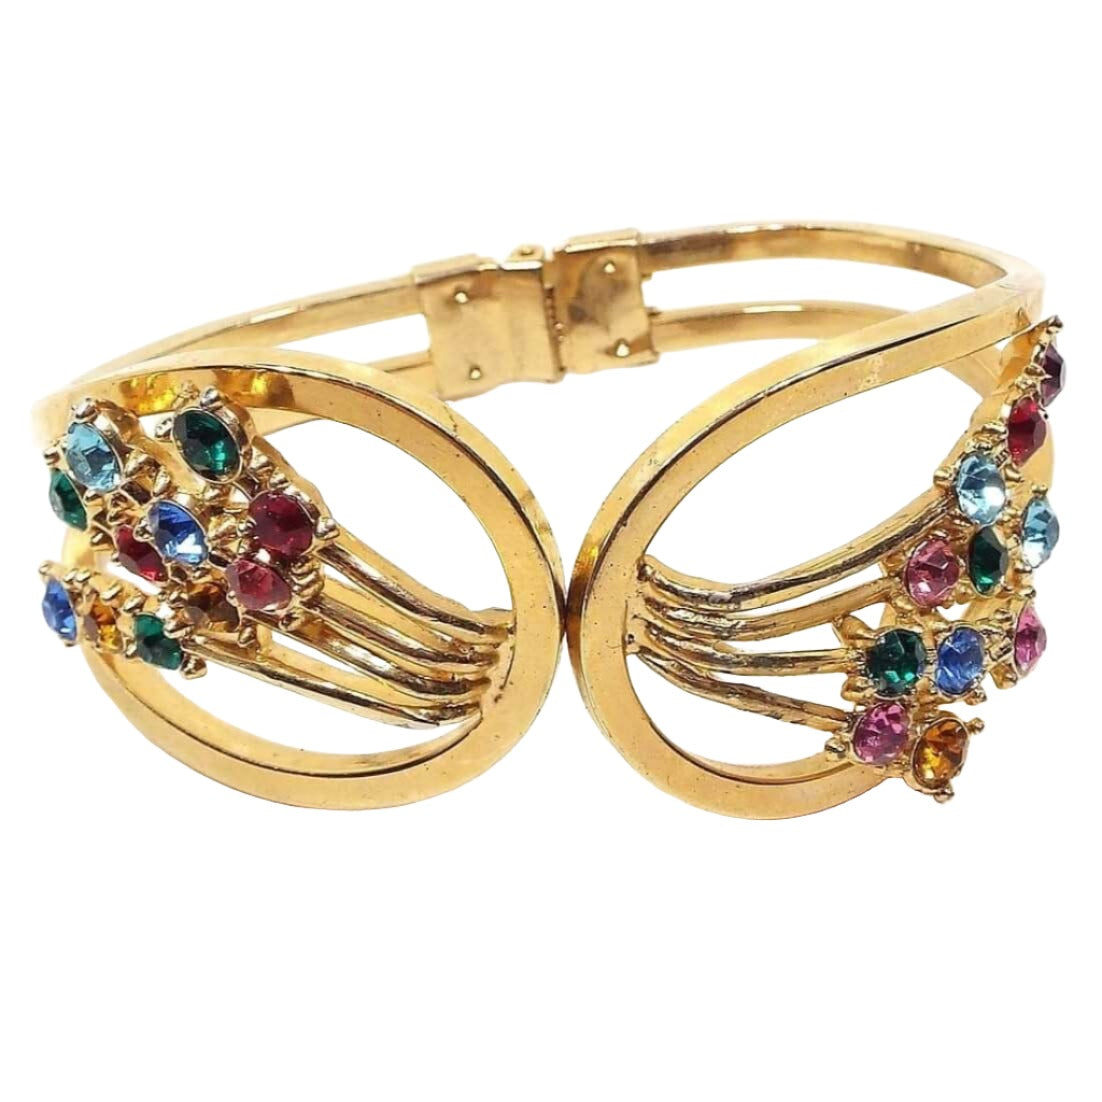 Front view of the Mid Century vintage rhinestone hinged bangle bracelet. The bracelet is gold tone in color and has a clamper style design that opens at the top and is hinged in the back. There are clusters of round rhinestones on each side in shades of green, blue, red, pink, yellow, and orange.